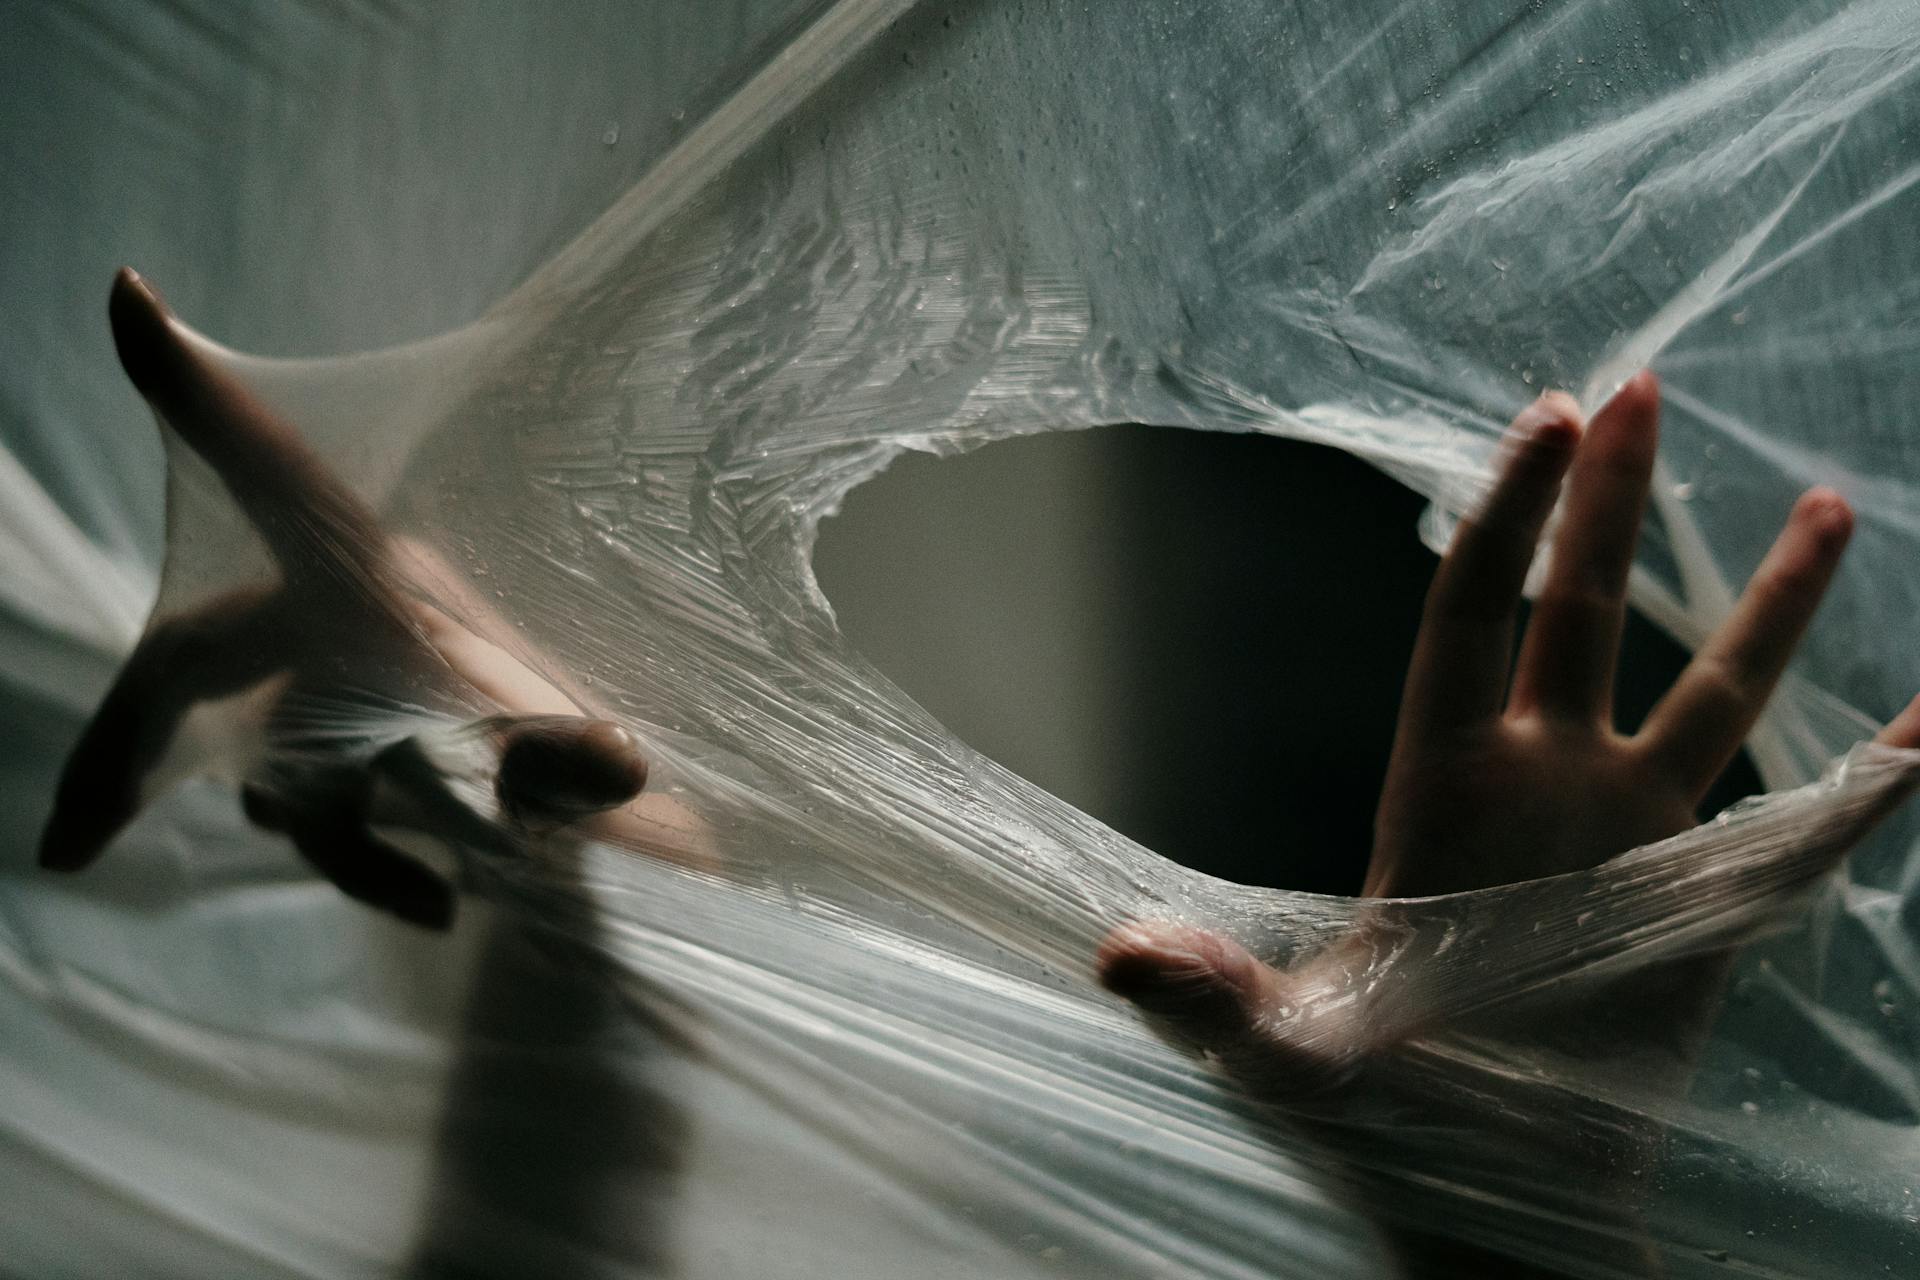 A person tearing through plastic wrap | Source: Pexels